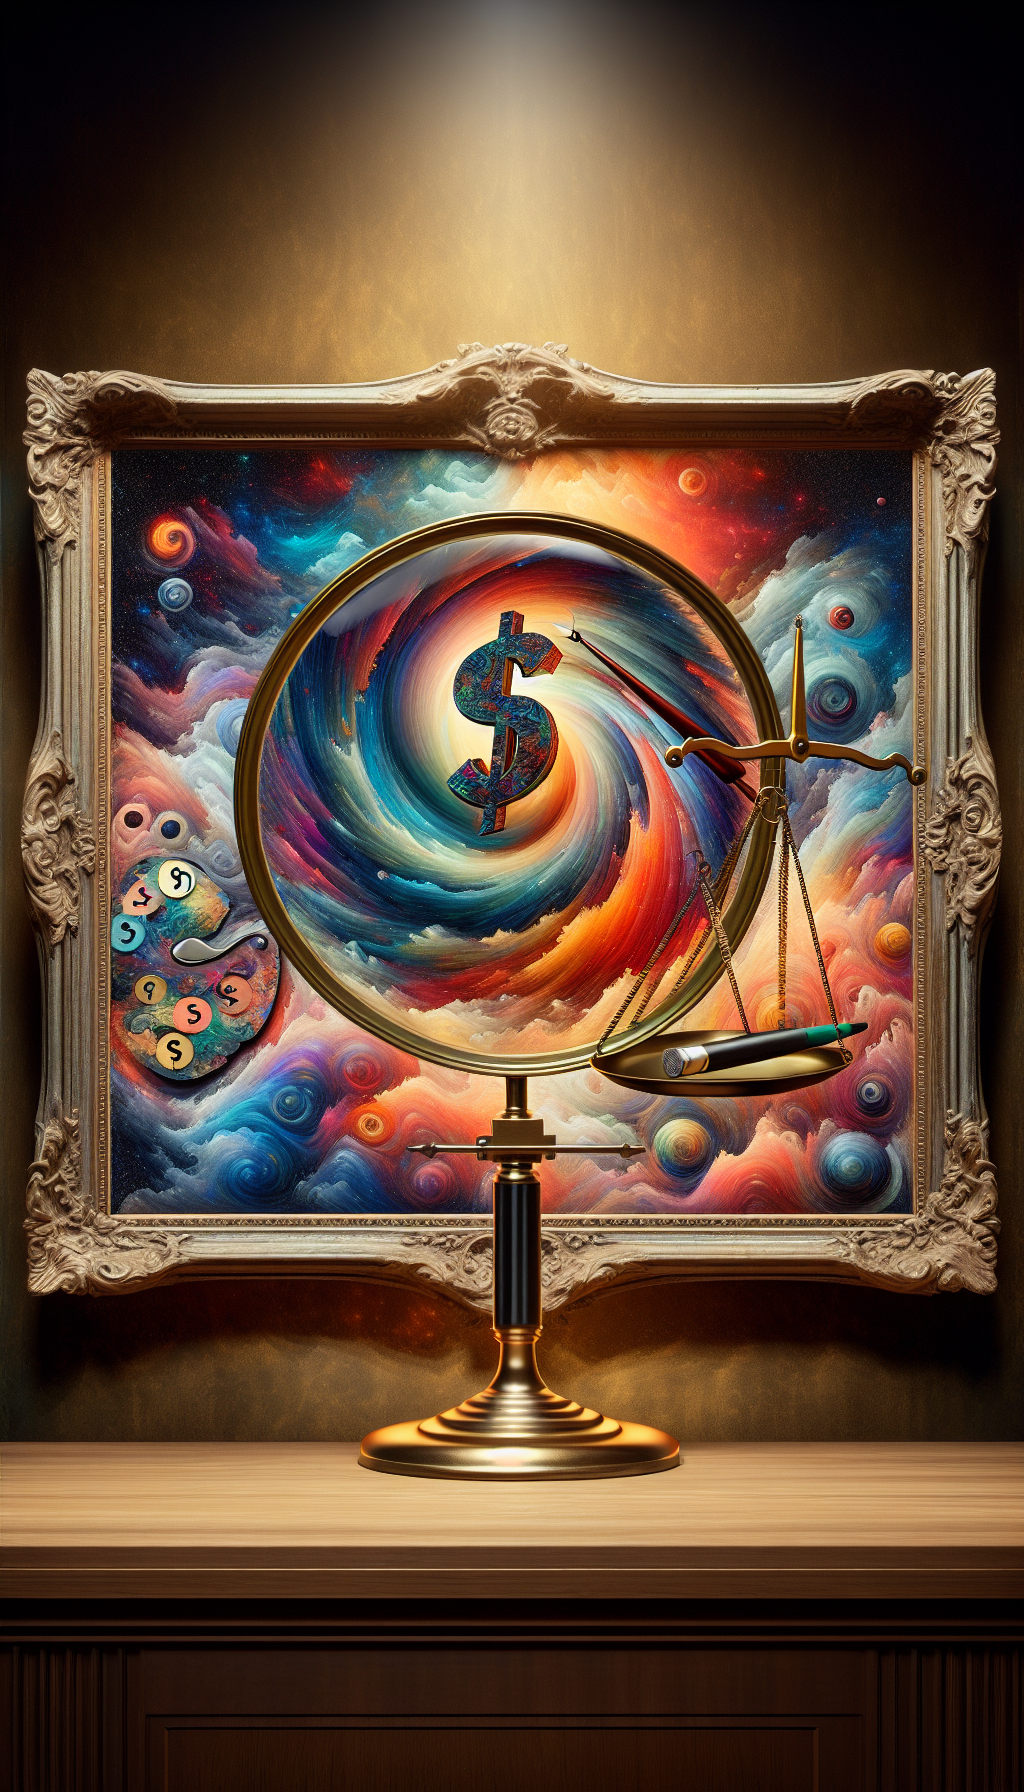 An antique frame encasing a magnifying glass, through which a dollar sign and question mark blend within a vibrant, swirling galaxy of brush strokes, symbolizing the universe of art valuation. Below, a golden scale balances a palette and a "no-cost" tag, hinting at the equilibrium between art's intrinsic value and its complimentary assessment. The styles range from realism in the frame to abstract within the magnifying focus.